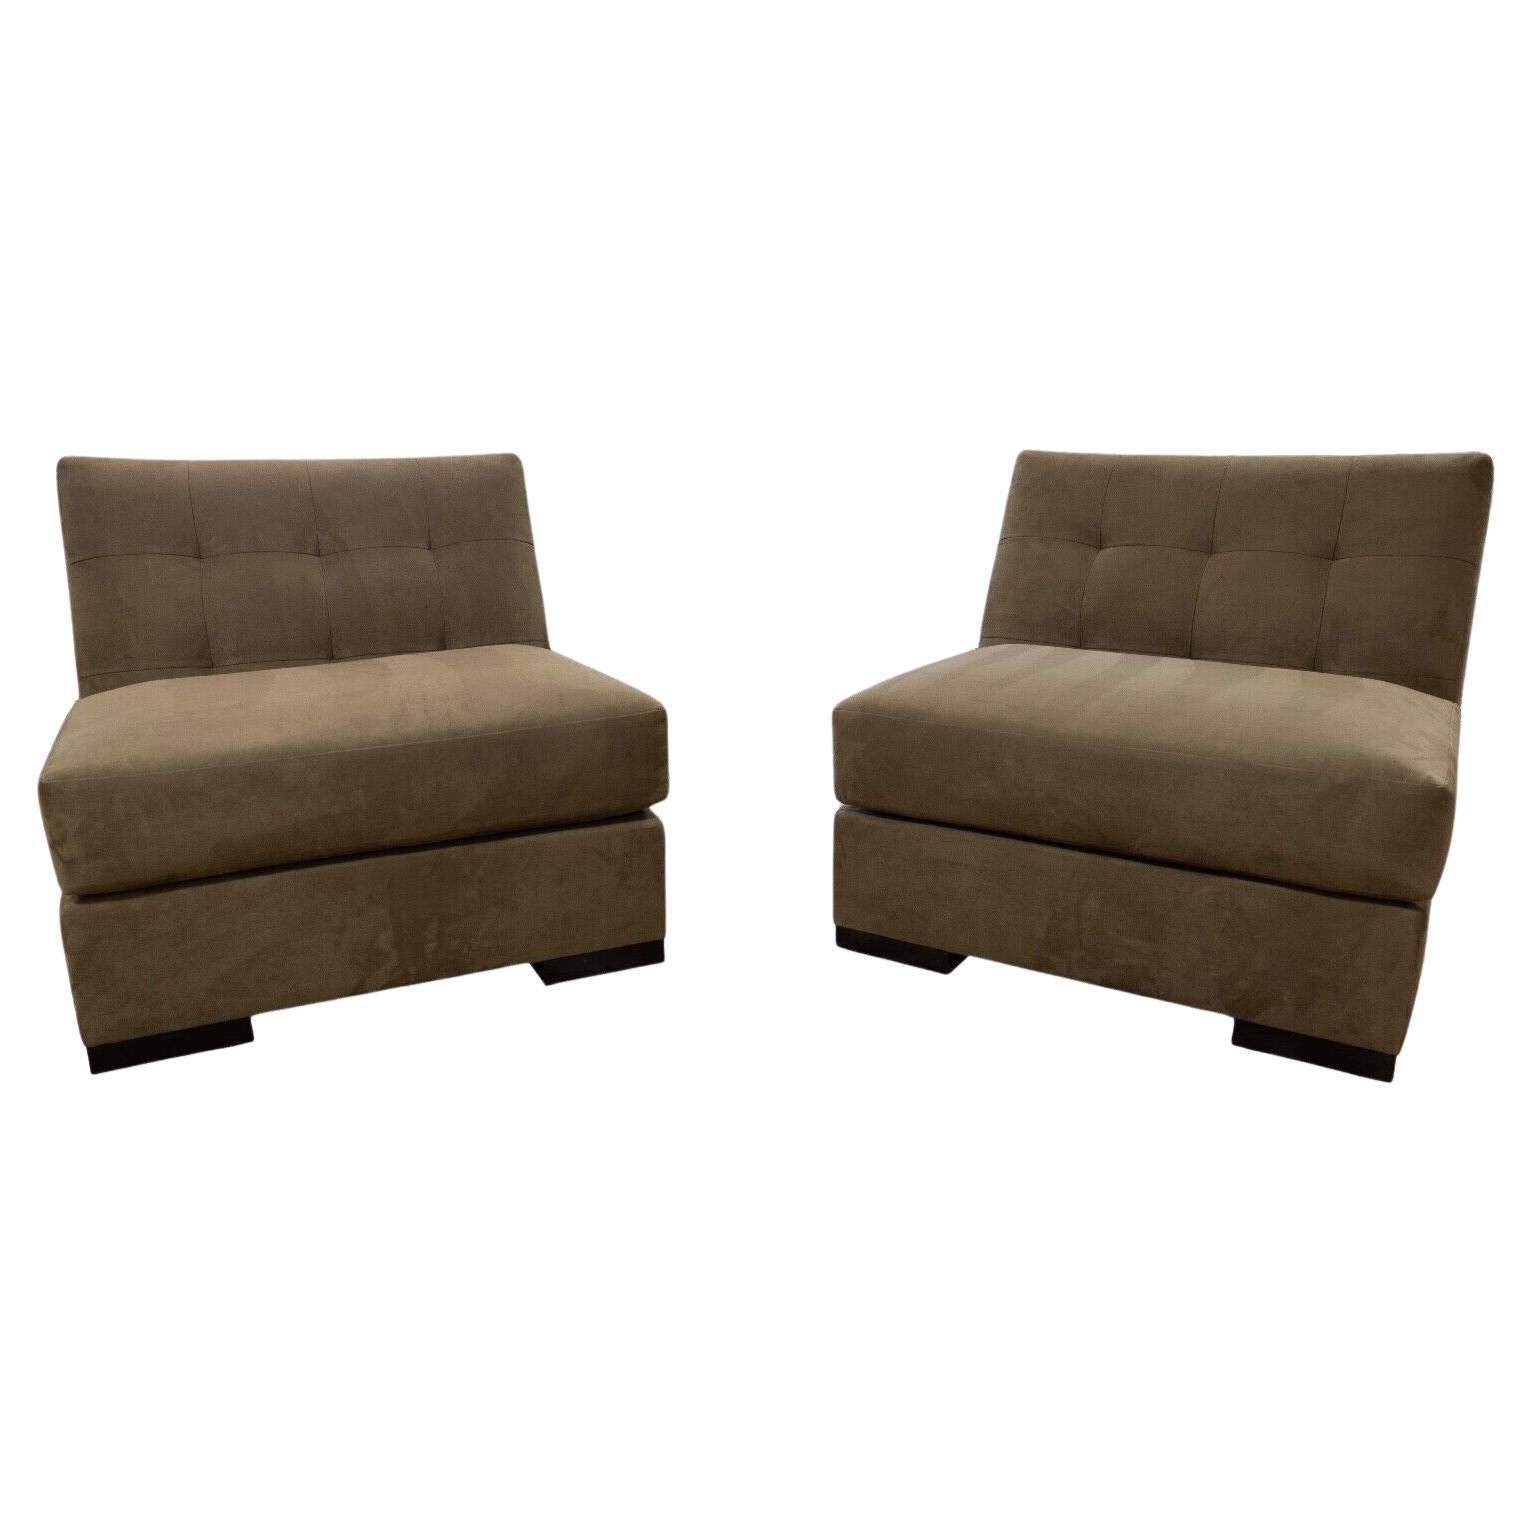 Interior Craft Pair of Suede Taupe Chairs Contemporary Modern For Sale